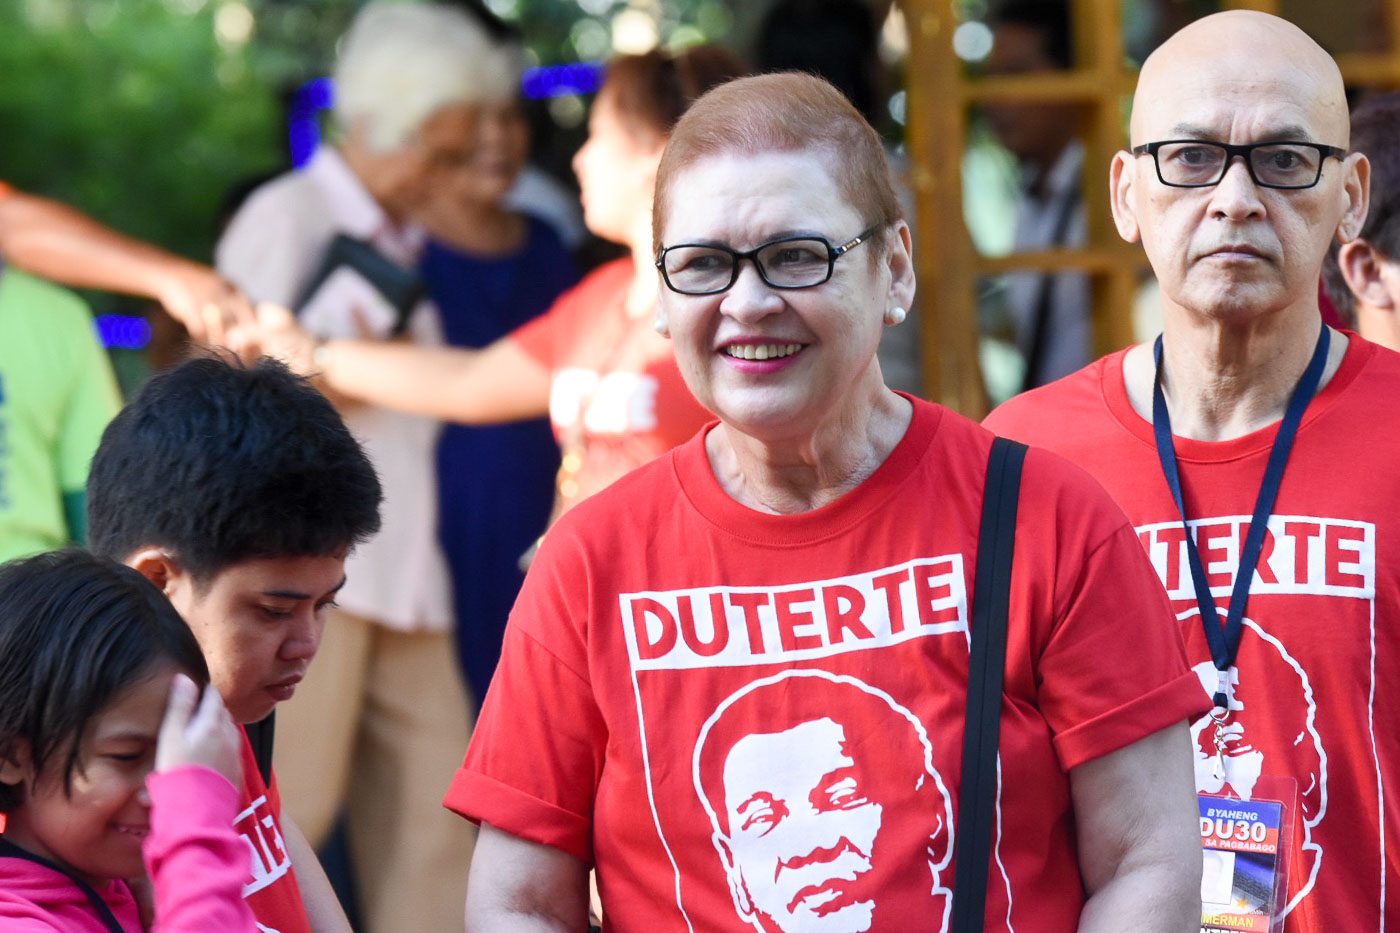 Duterte’s ex-wife joins campaign